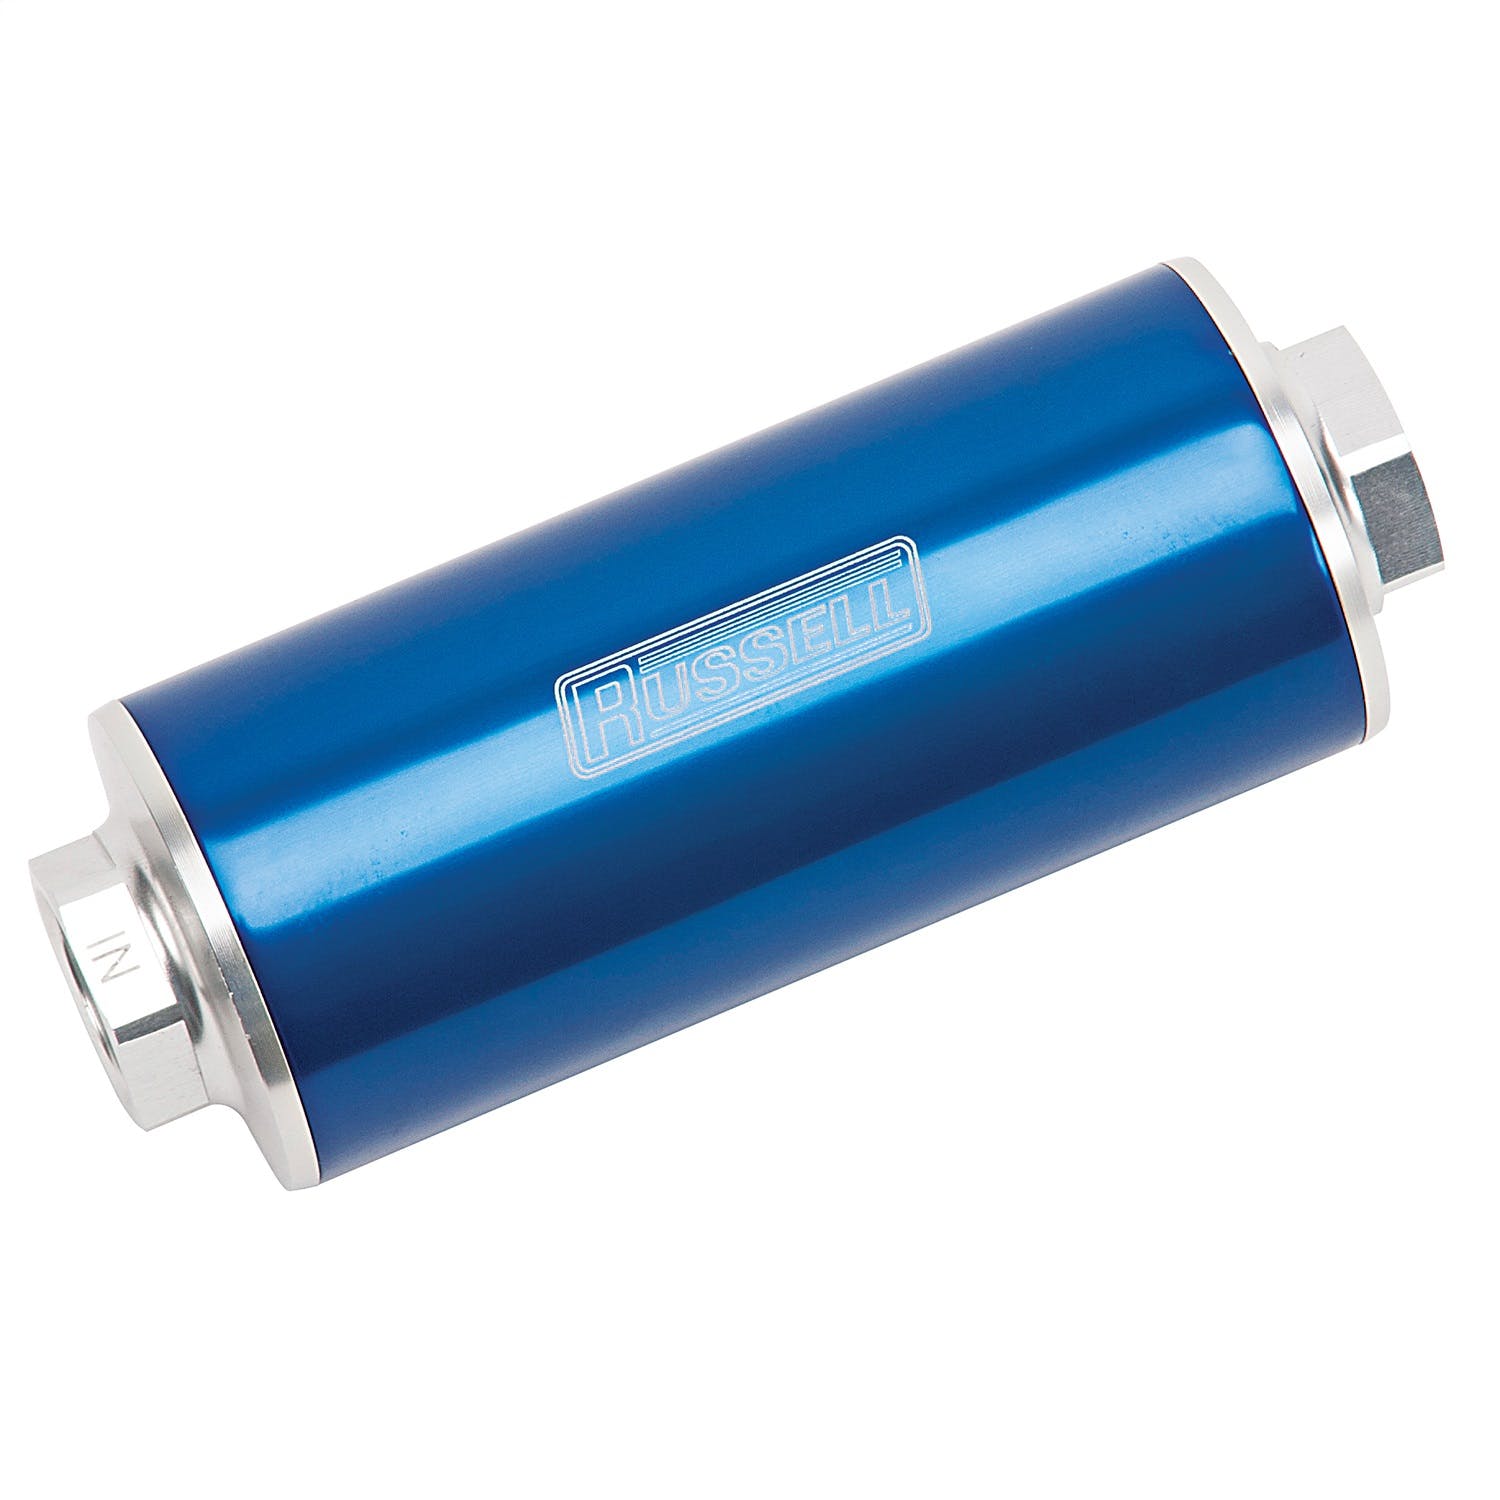 Russell 649252 Fuel filter, Profilter, 6 in. long, 10 Micron, #10 AN Inlet/#10 AN Outlet,